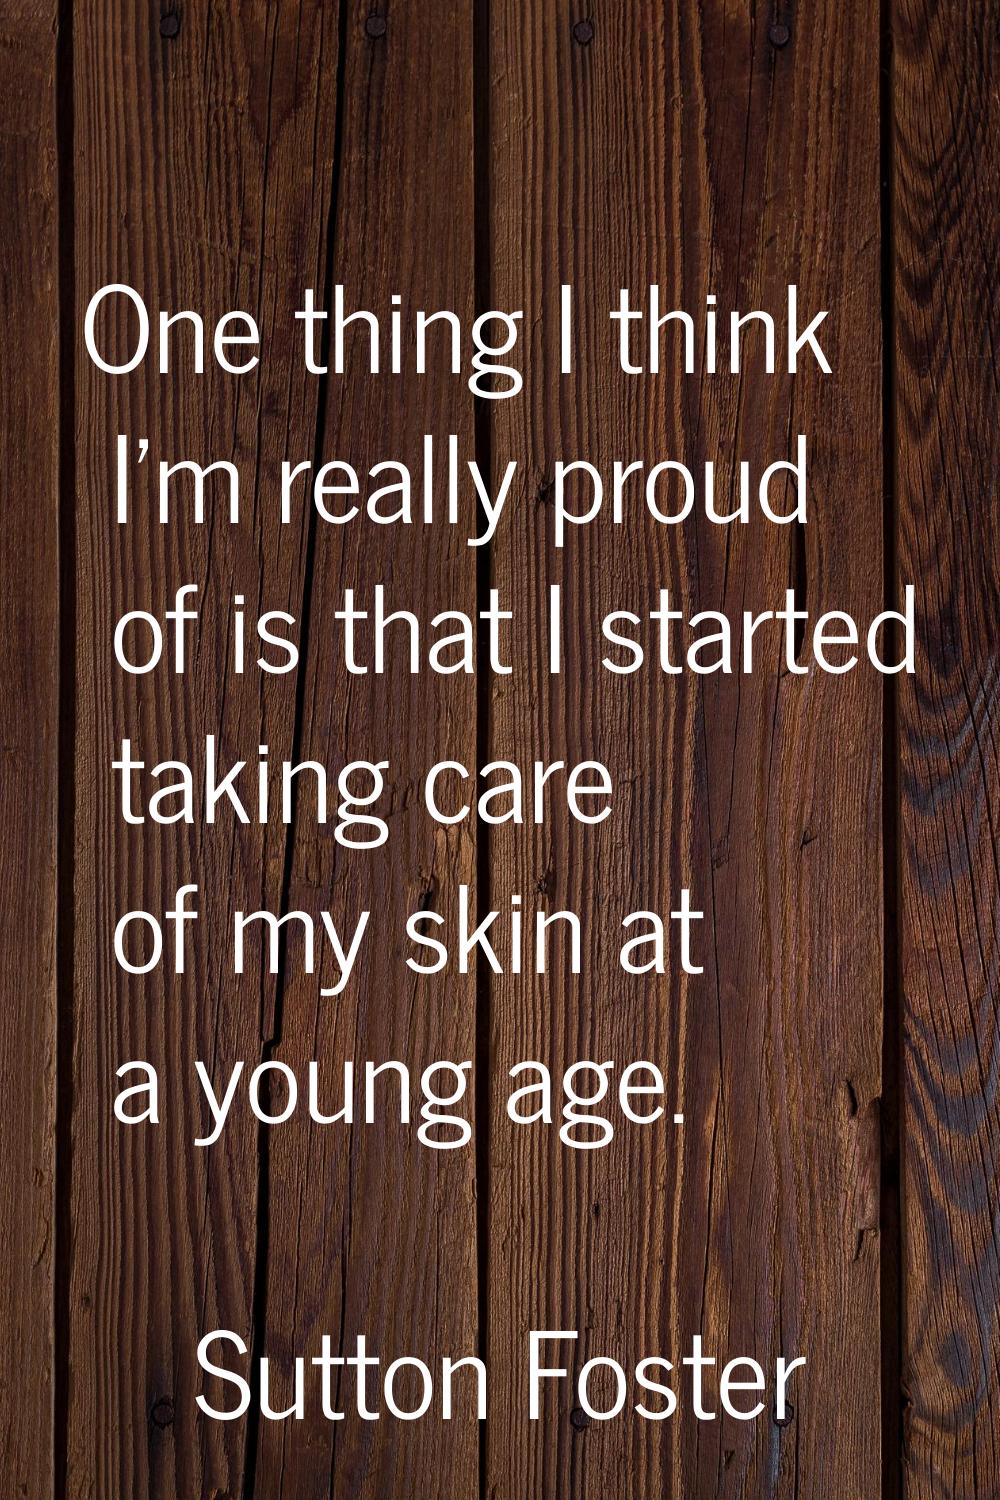 One thing I think I'm really proud of is that I started taking care of my skin at a young age.